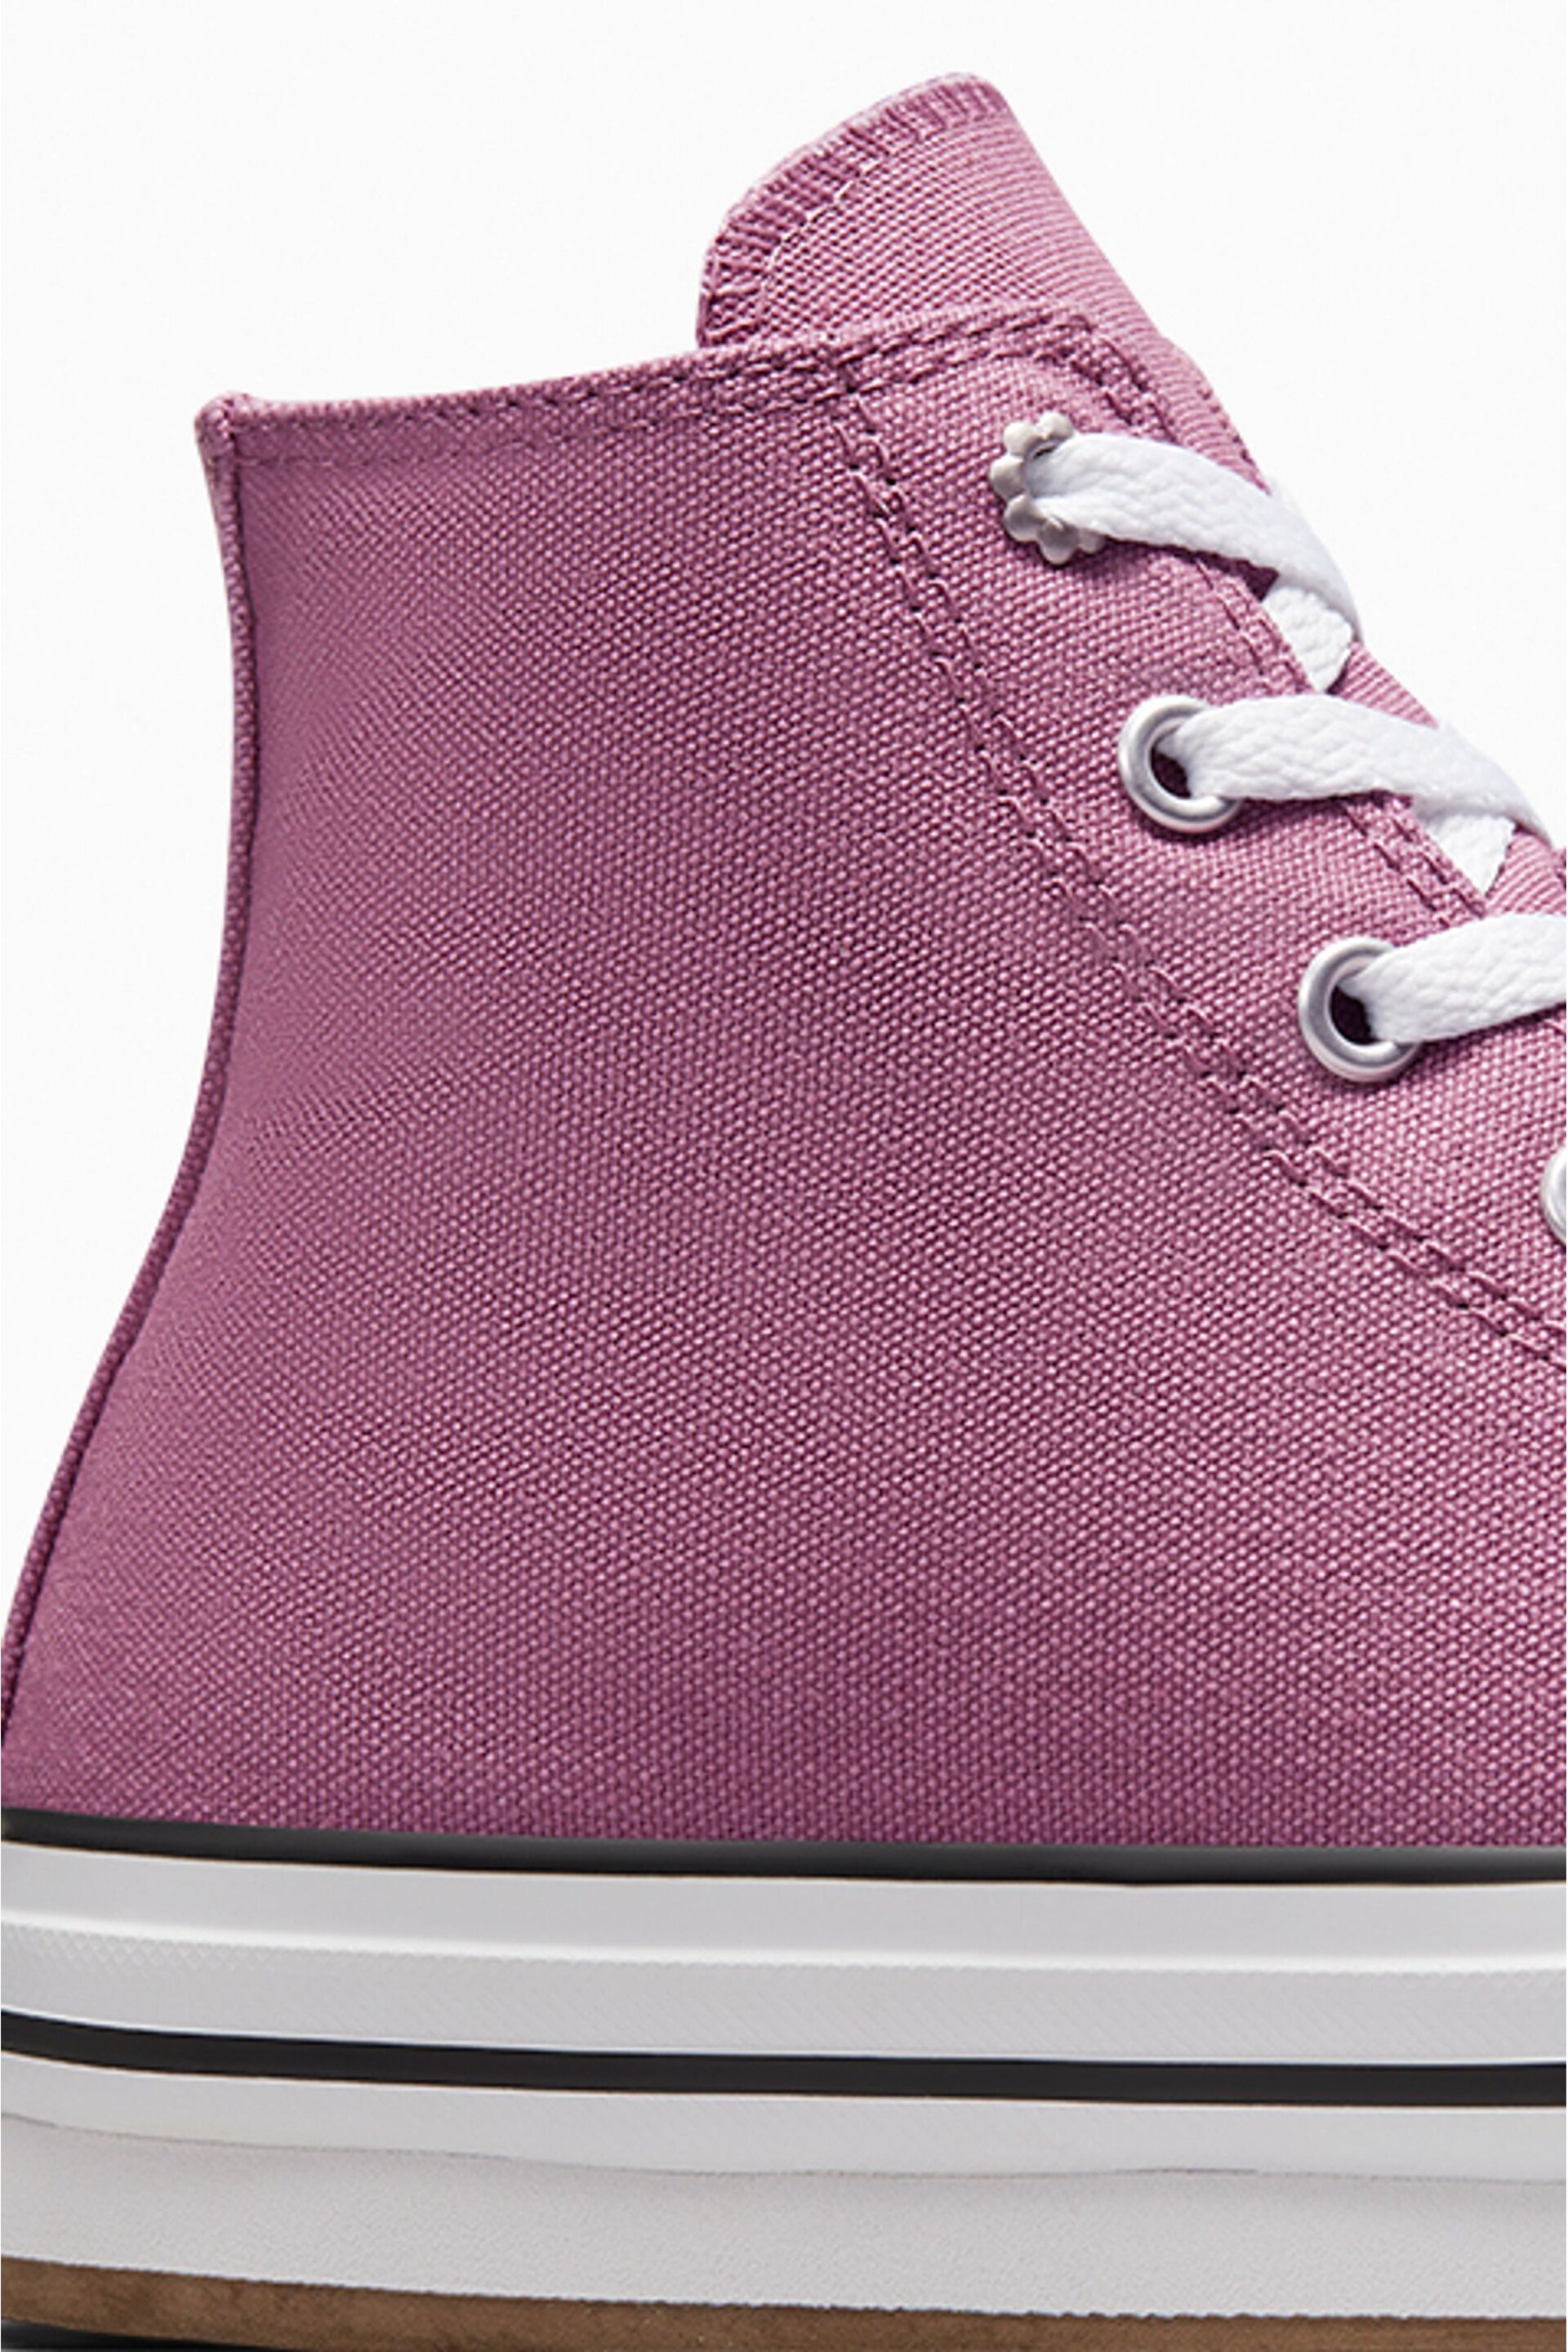 Converse Pink Youth Eva Lift Trainers - Image 10 of 10